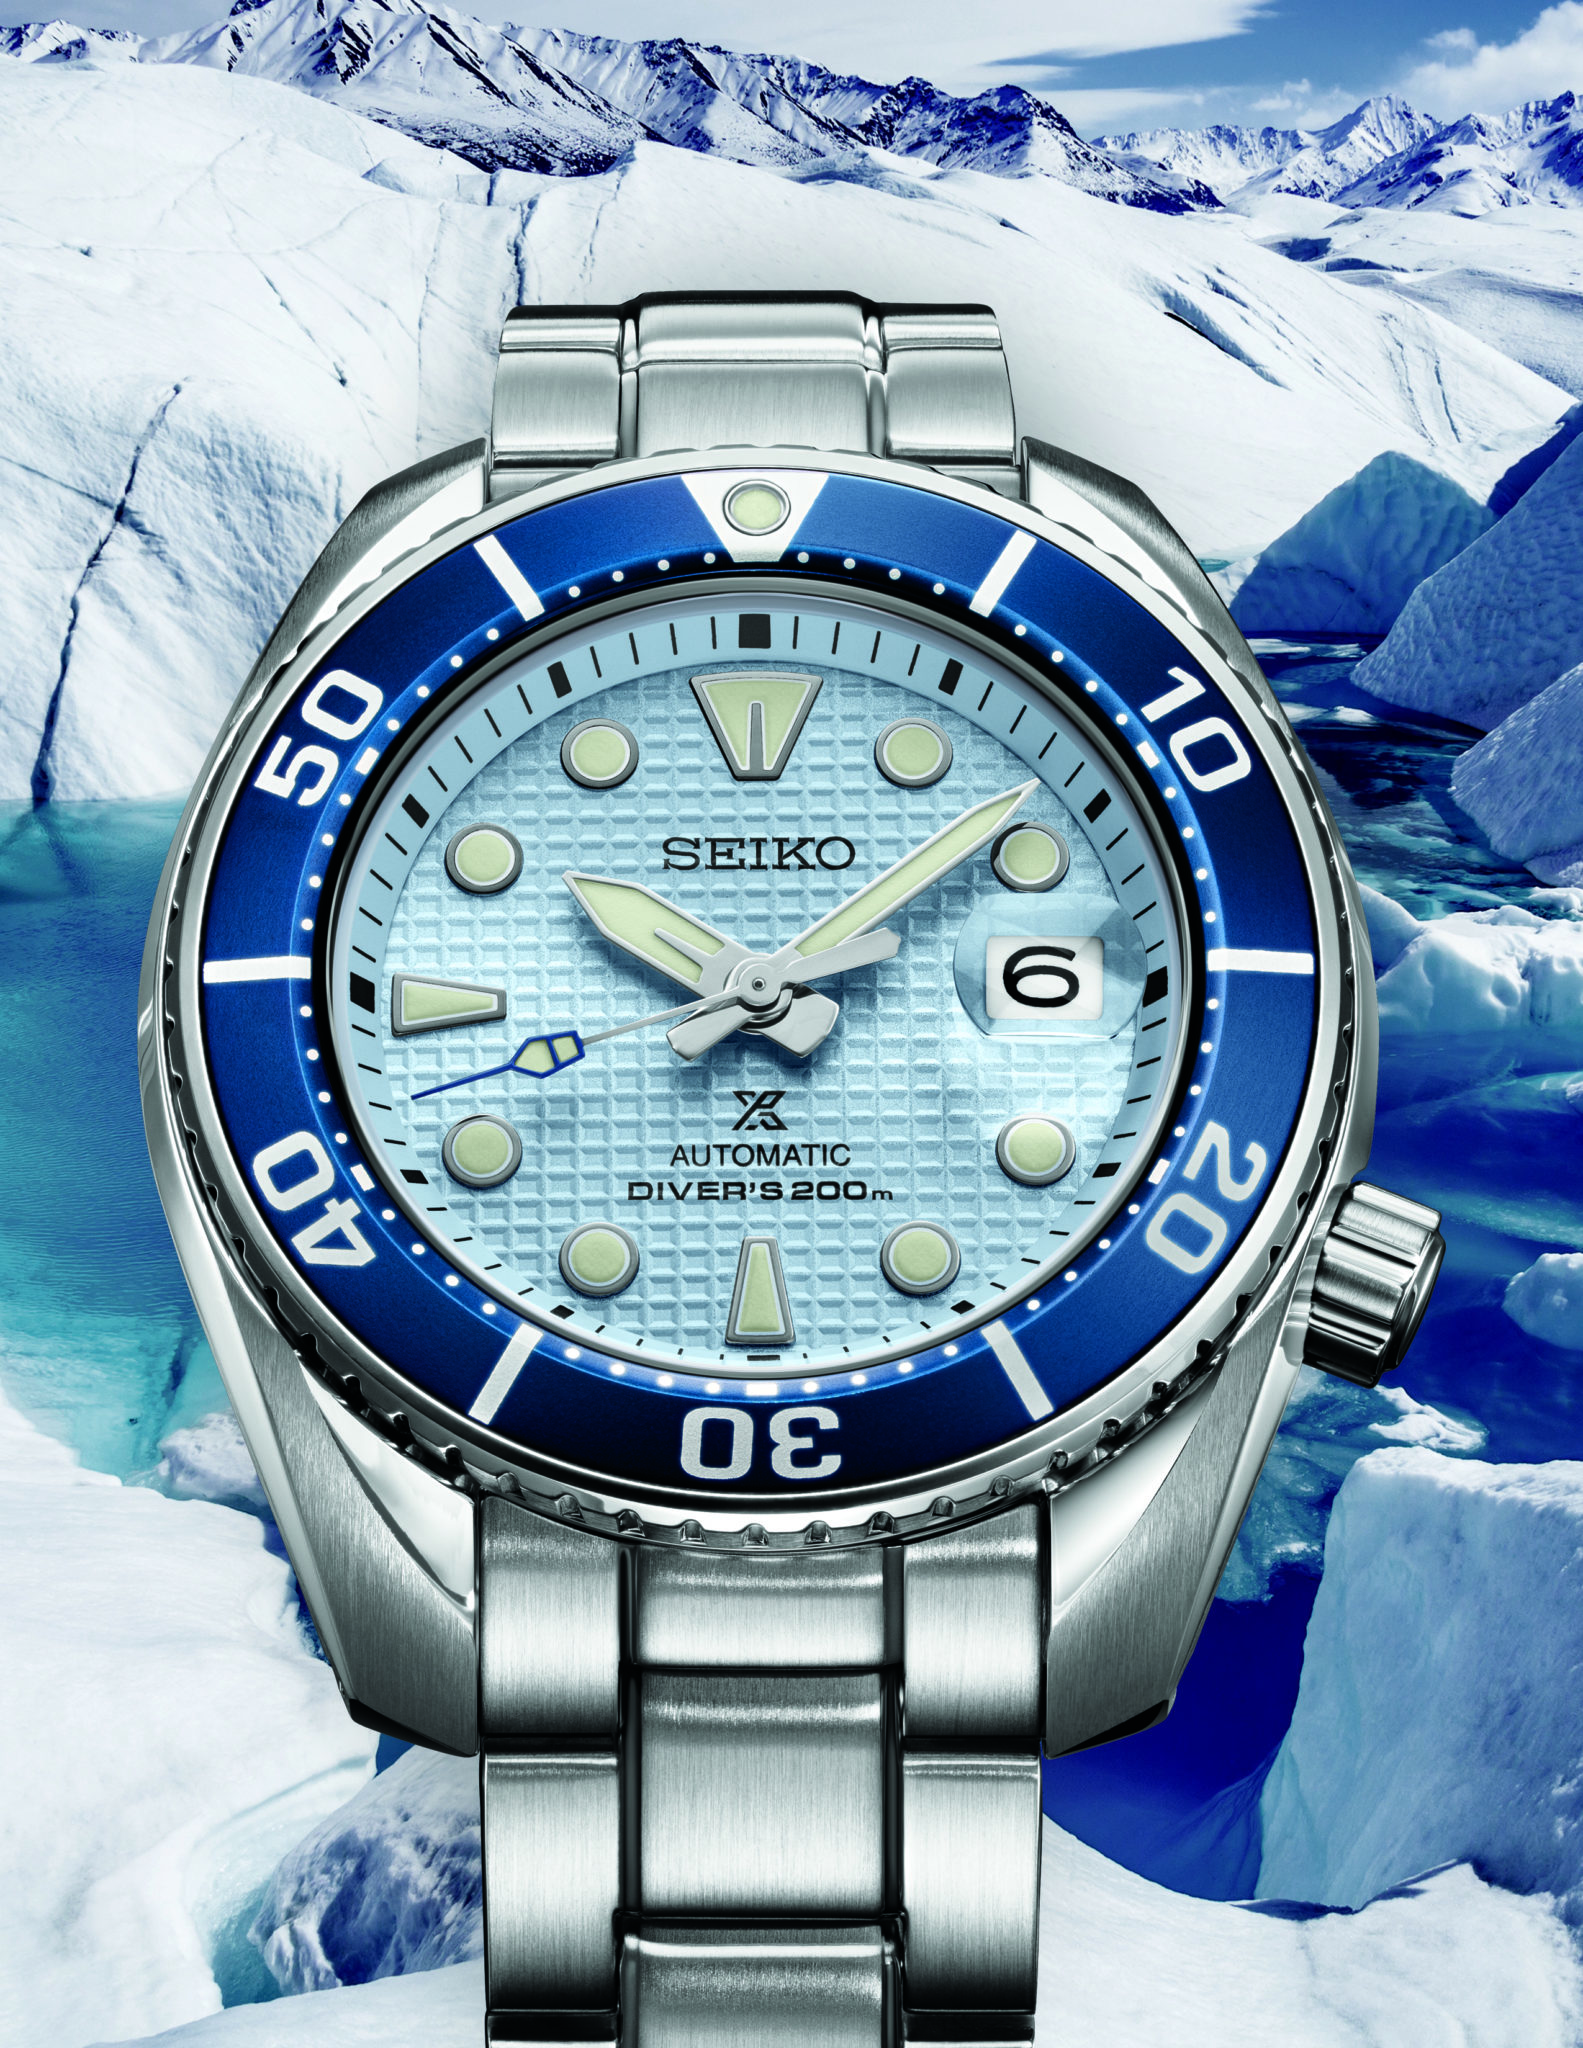 Showing at WatchTime Live 2020: A Trio of U.S.-Exclusive Seiko Prospex ...